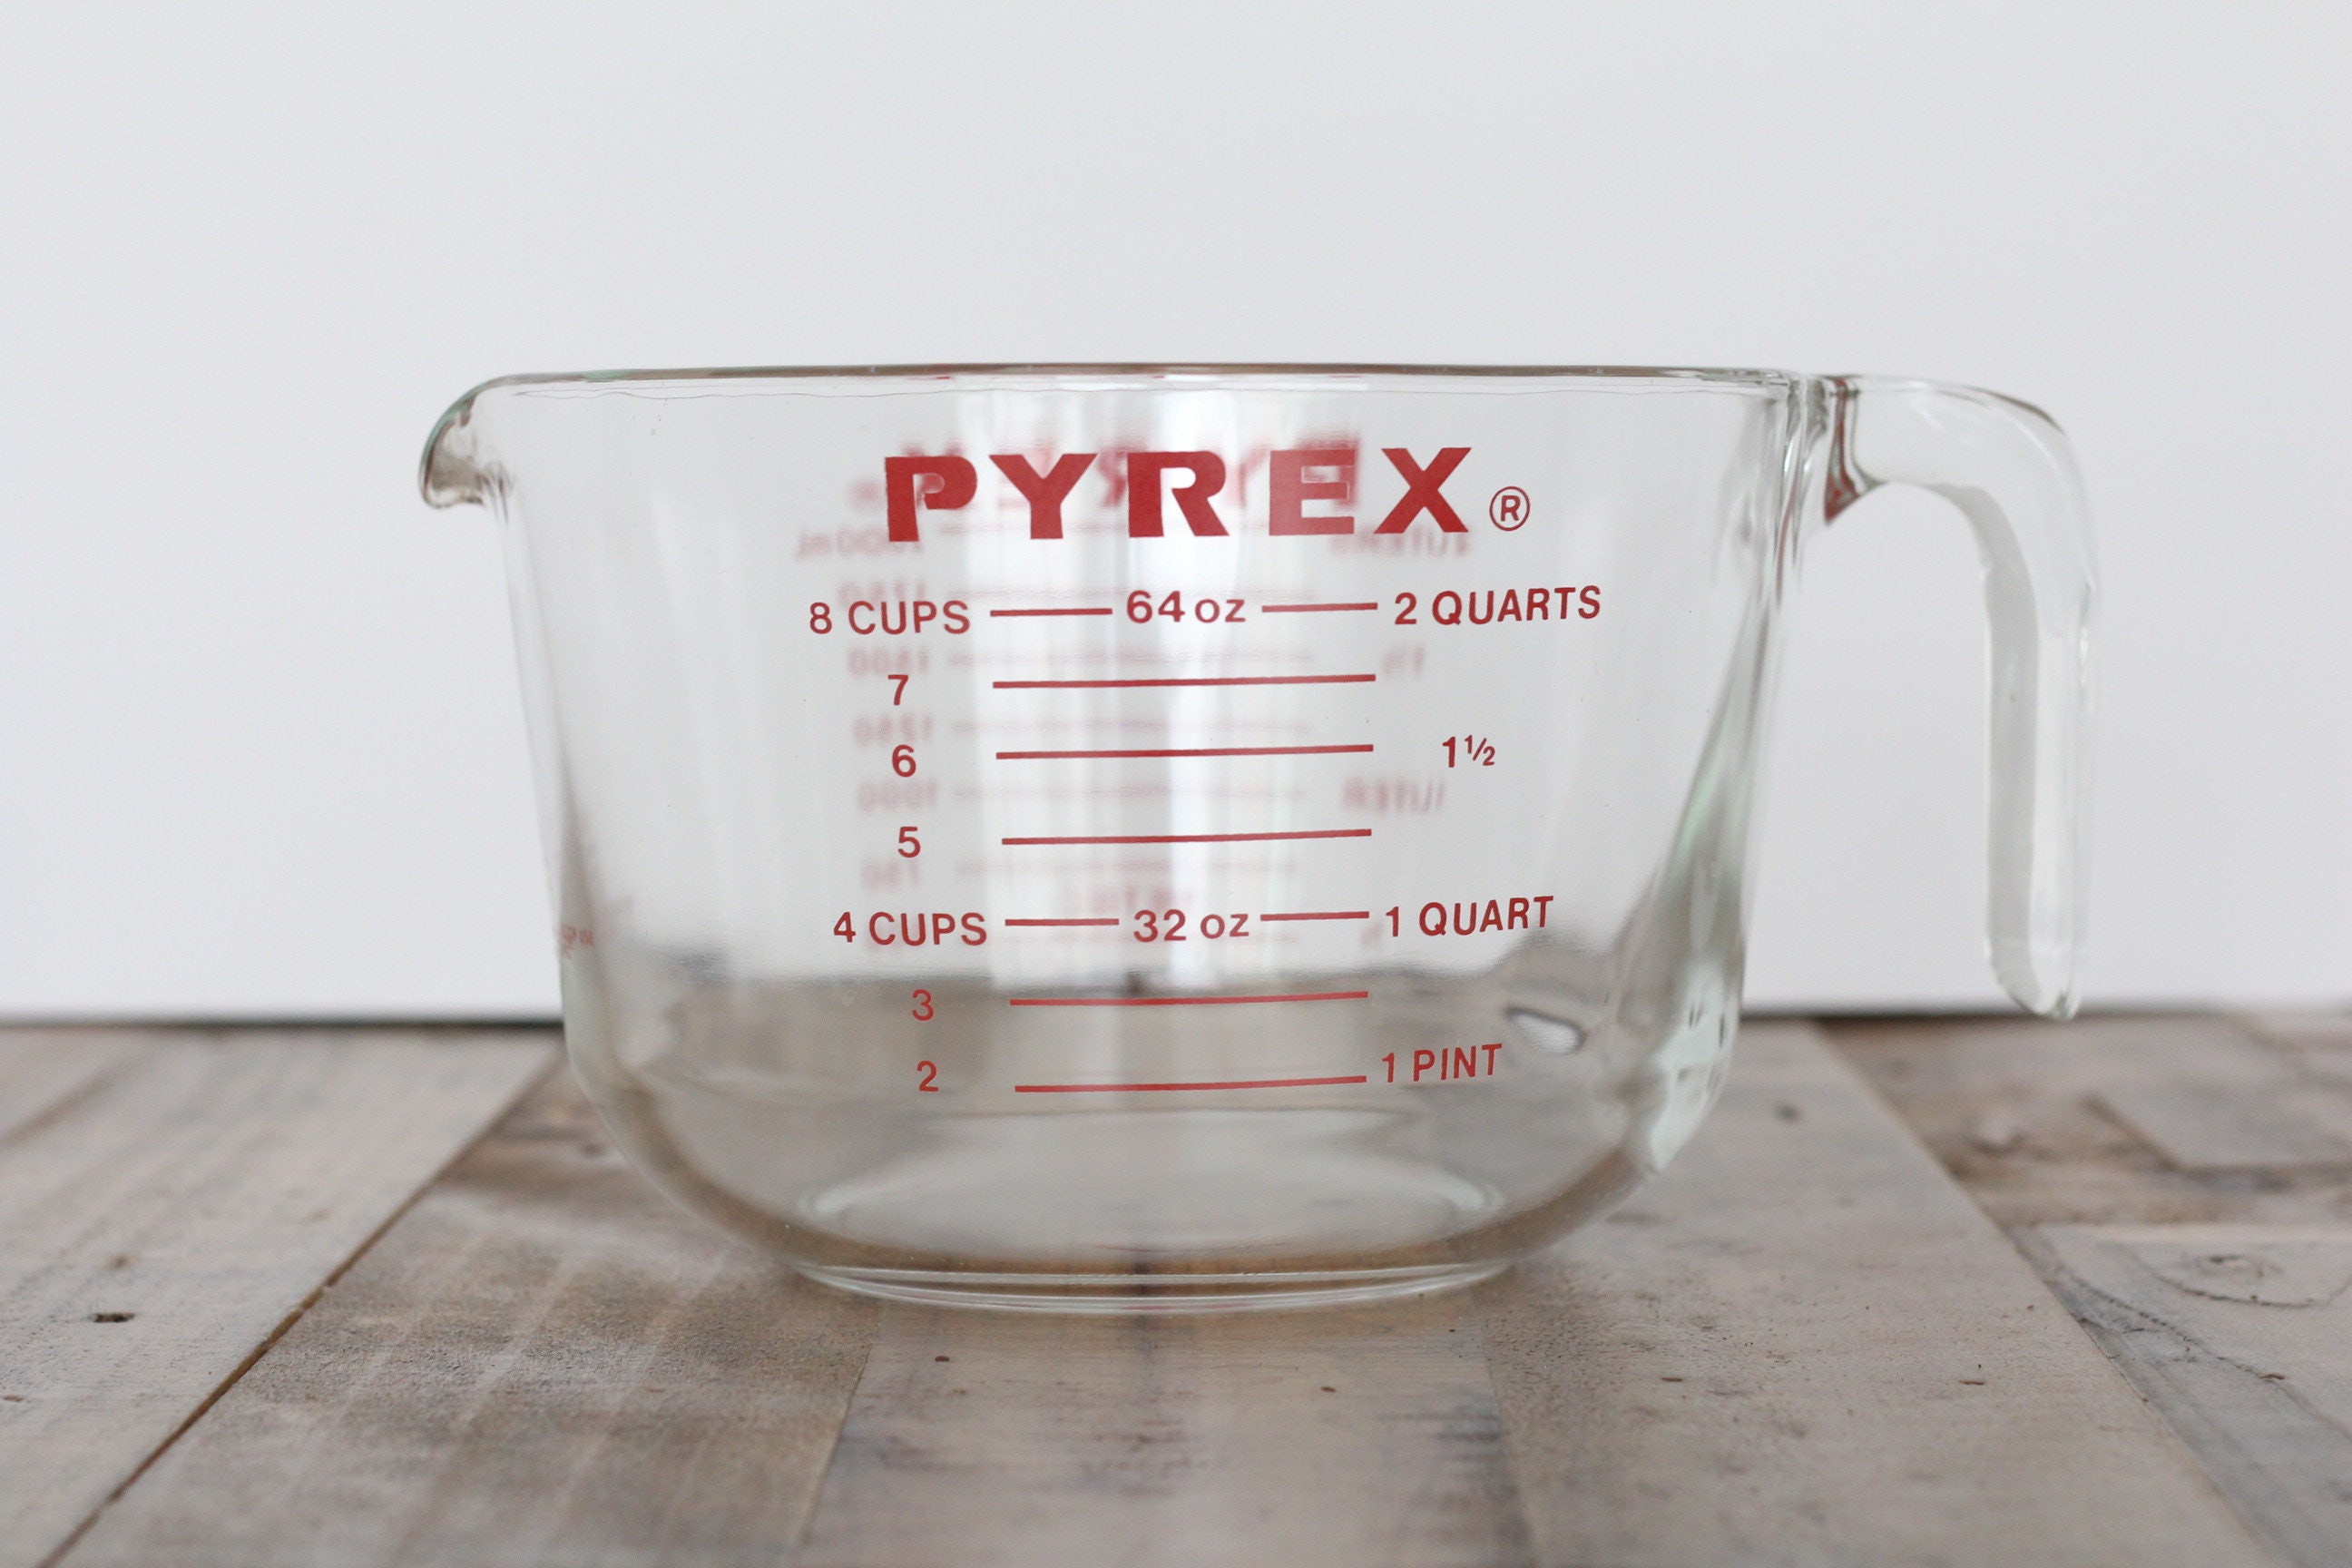 Rare Vintage Pyrex 8 Cup Clear Measuring Bowl Red Lettering Model 564  Corning NY USA 2 Liter Capacity Extra Large Mixing Bowl 